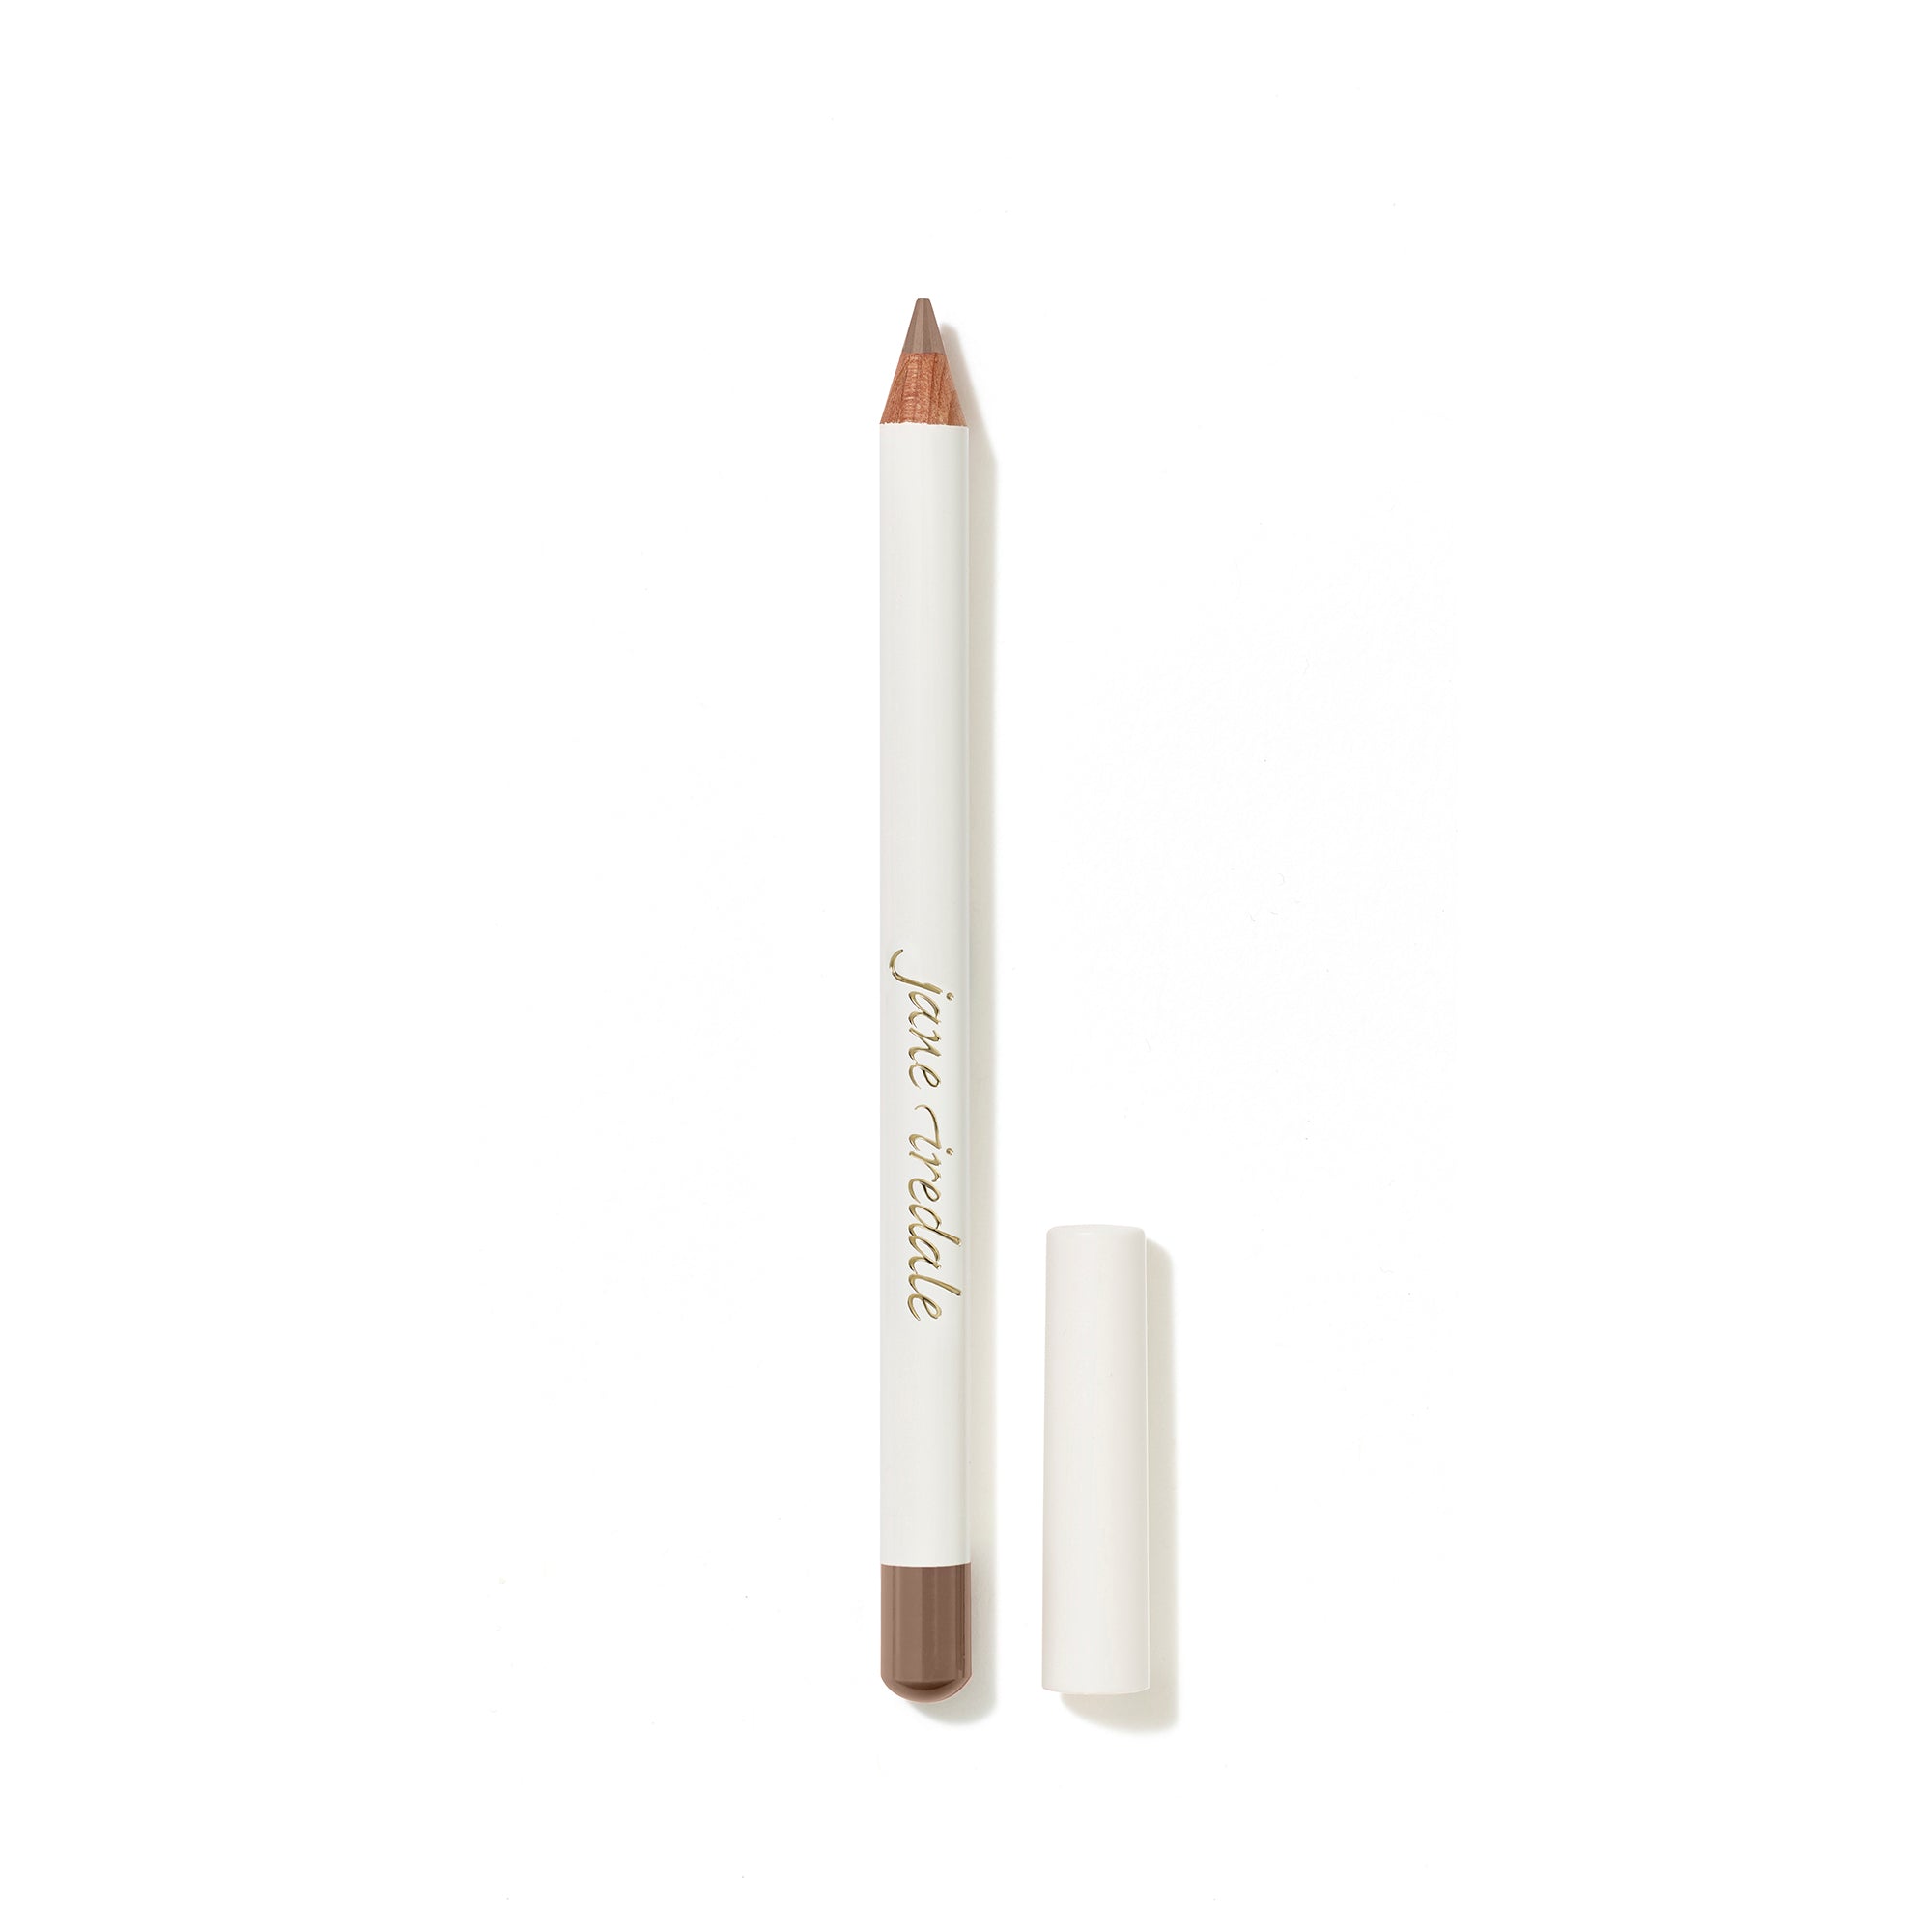 Jane Iredale Eye Pencil / Taupe